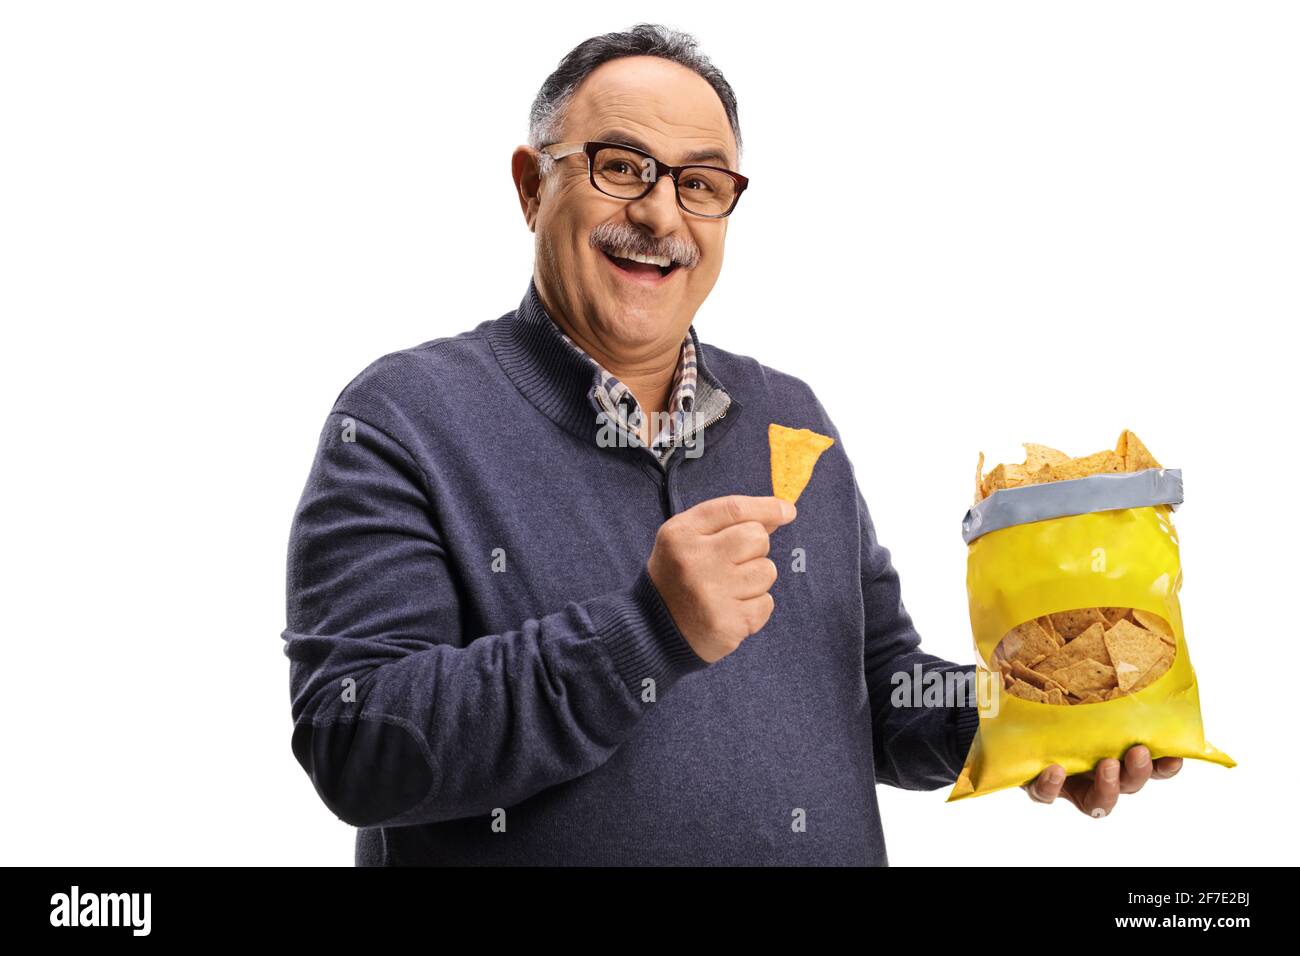 Cheerful mature man holding a pack of tortilla chips isolated on white background Stock Photo